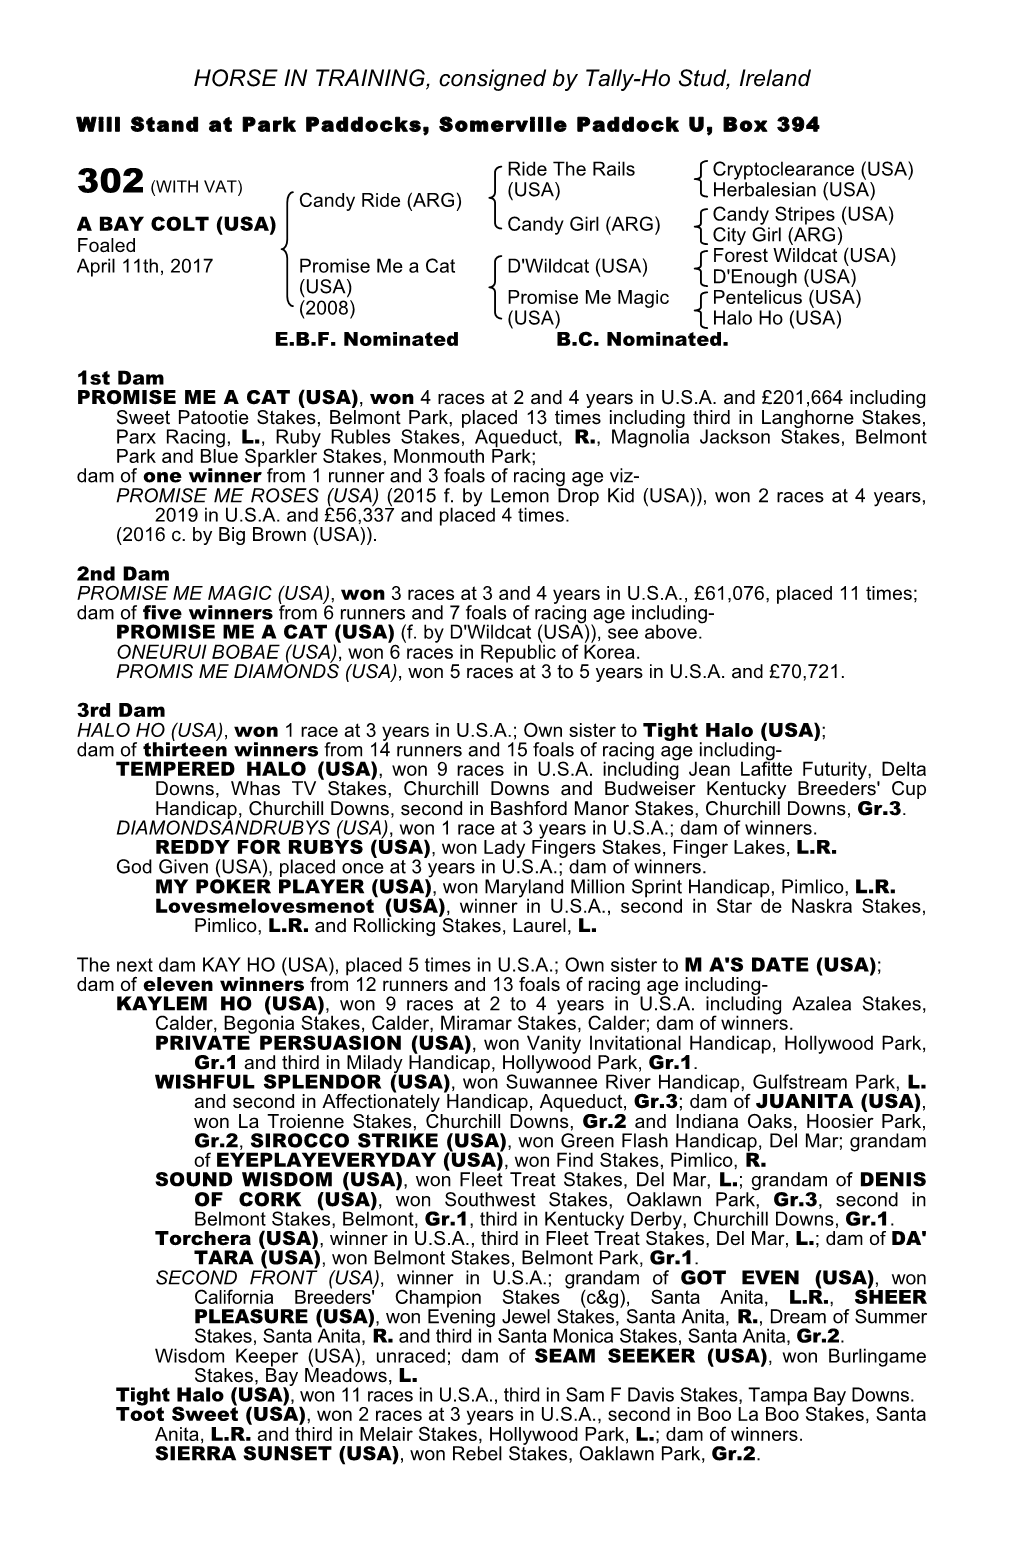 HORSE in TRAINING, Consigned by Tally-Ho Stud, Ireland